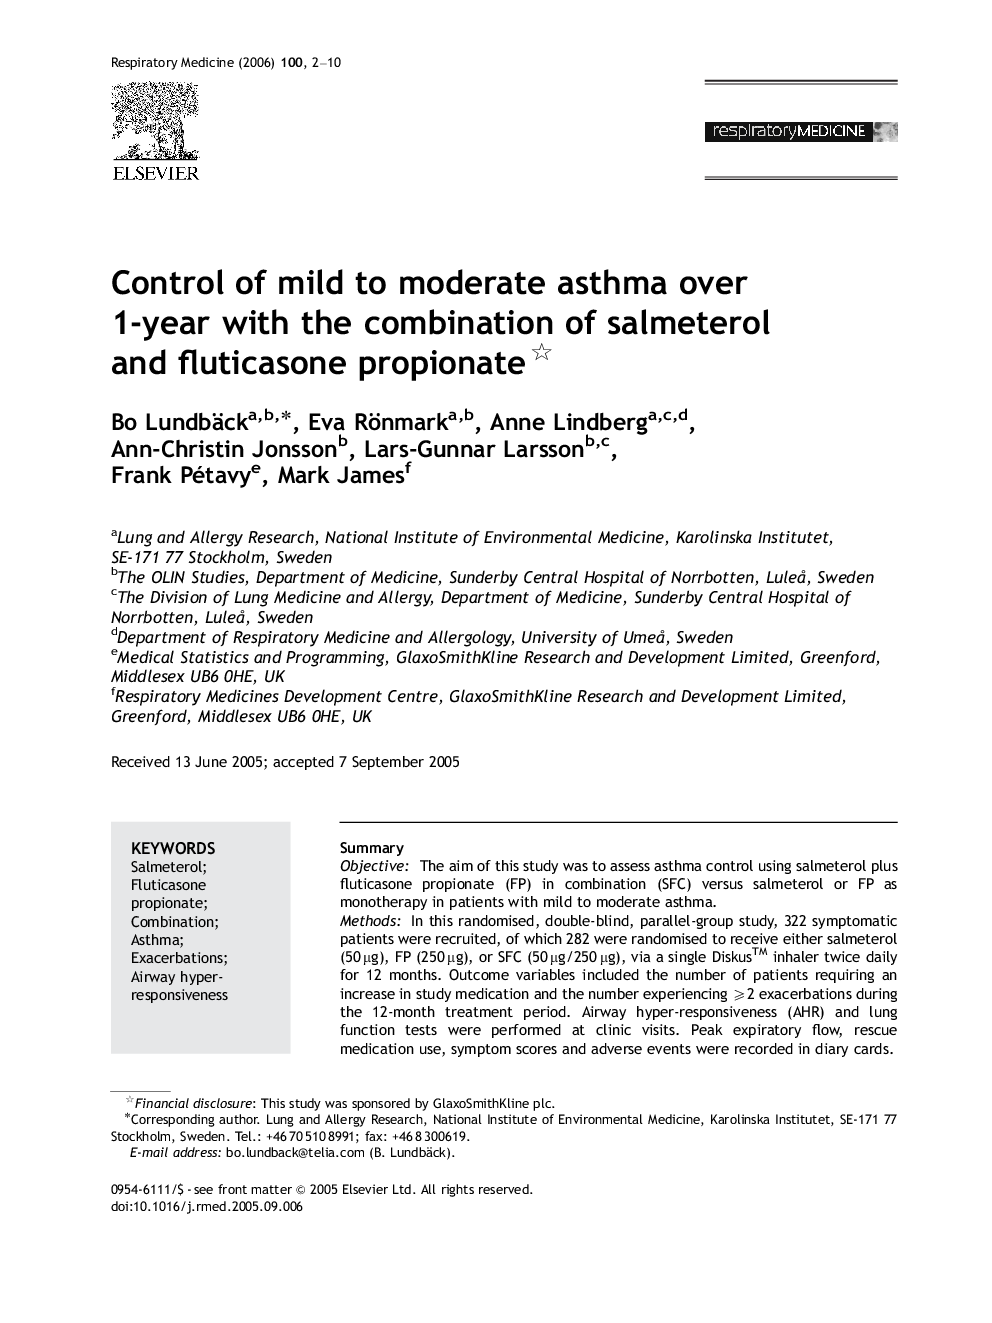 Control of mild to moderate asthma over 1-year with the combination of salmeterol and fluticasone propionate 